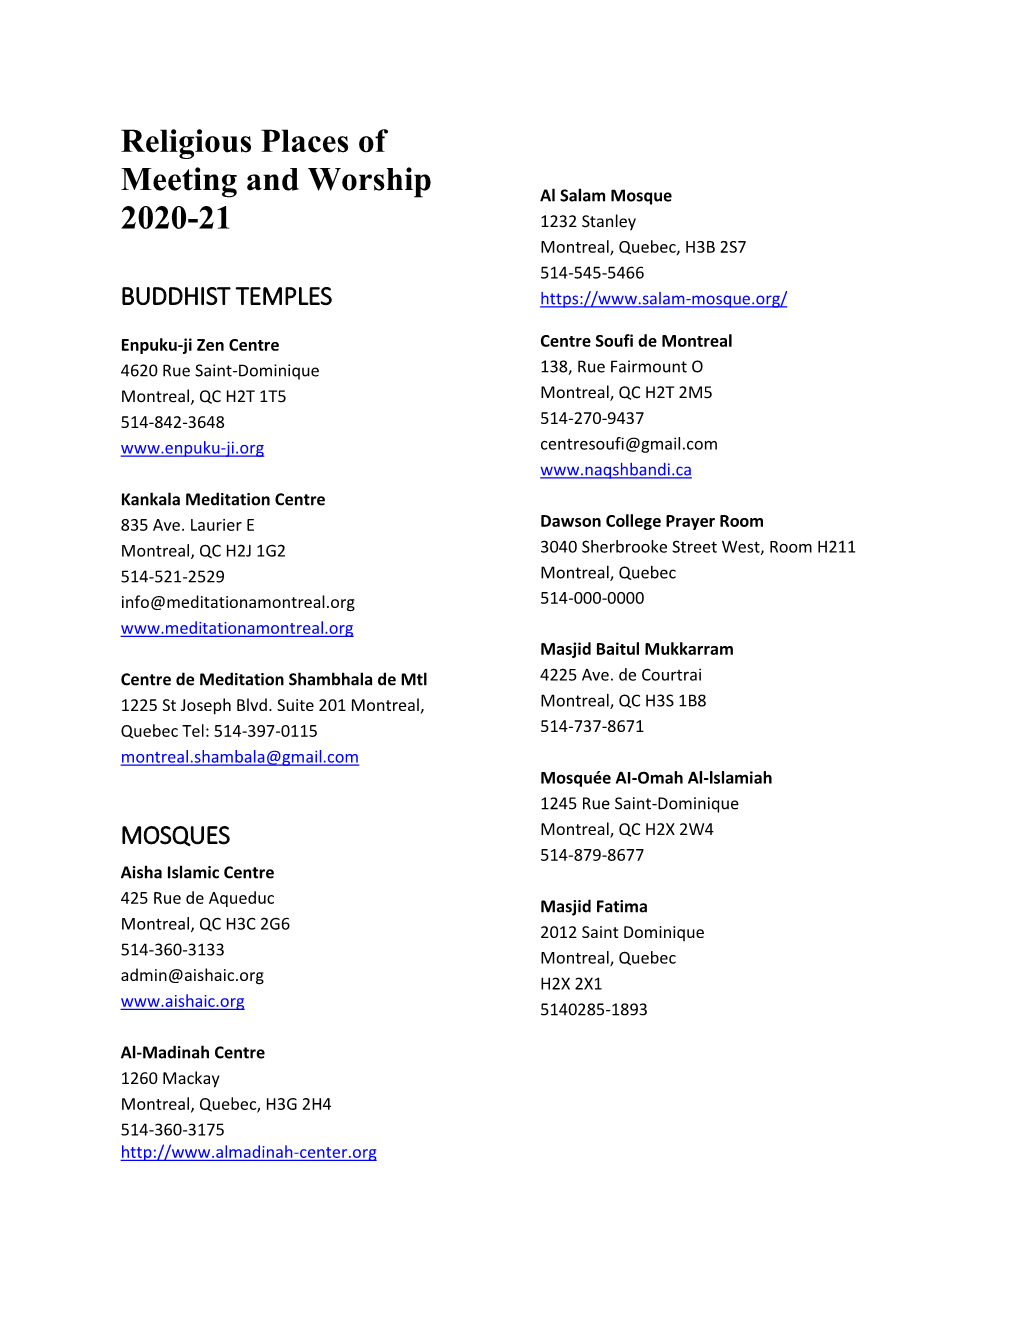 Religious Places of Meeting and Worship 2020-21